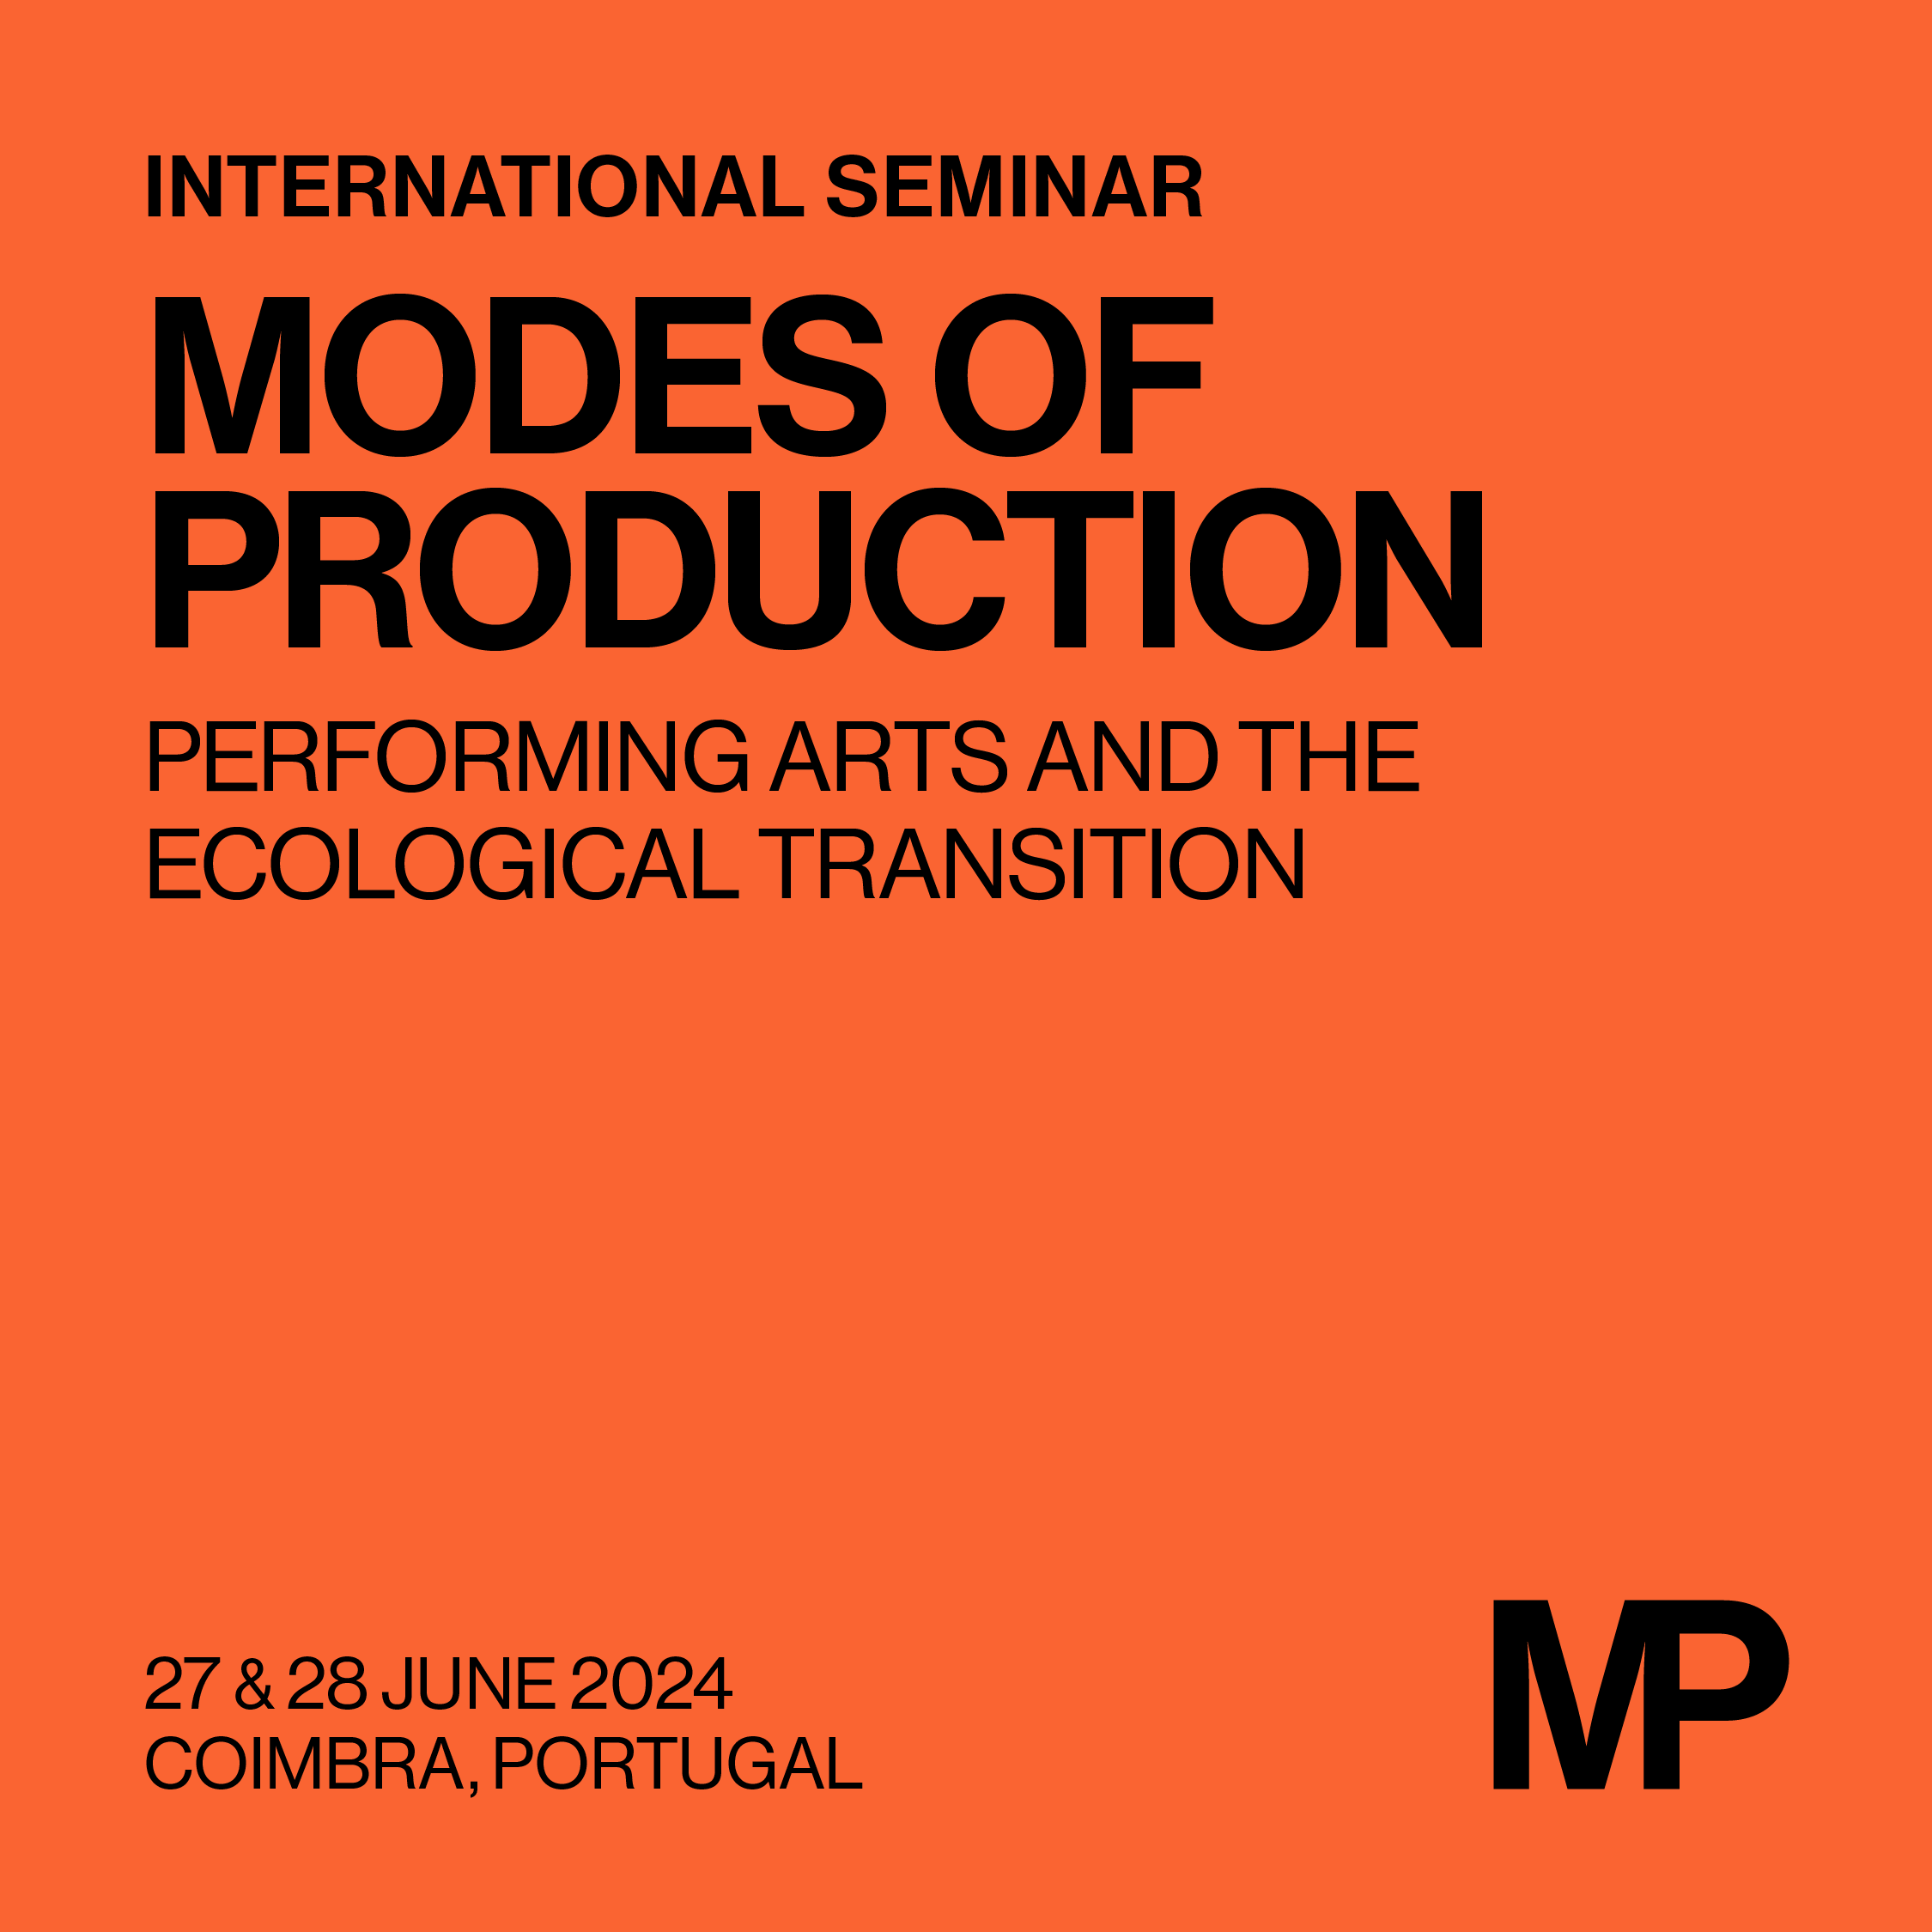 International Seminar Modes of Production - Performing Arts and the Ecological Transition - Early Bi